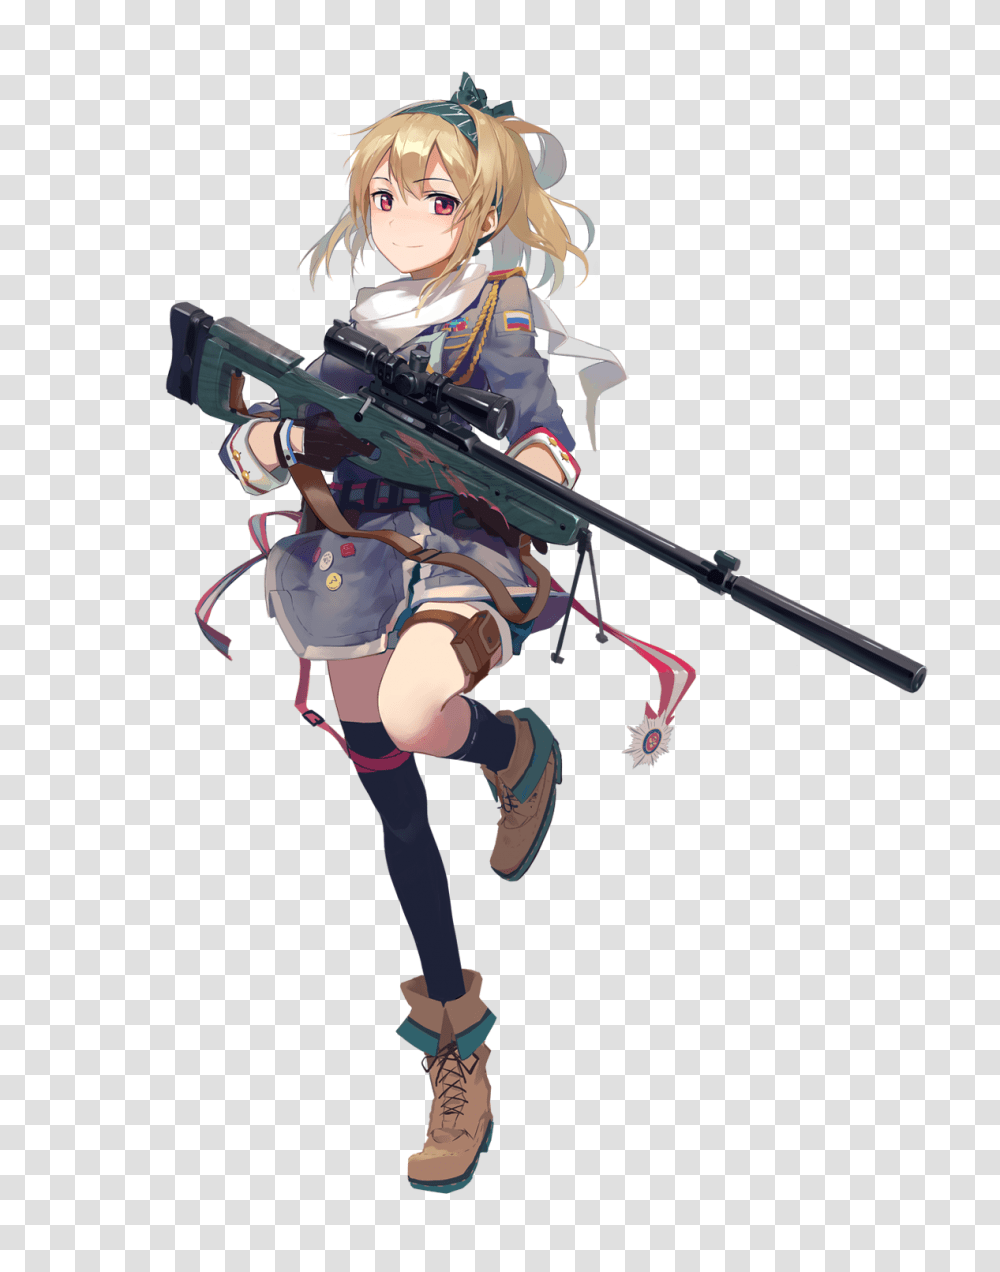 Anime Girl With Gun Glock Drawing Anime Girls Girls Frontline Sv, Person, Human, Overwatch, Comics Transparent Png